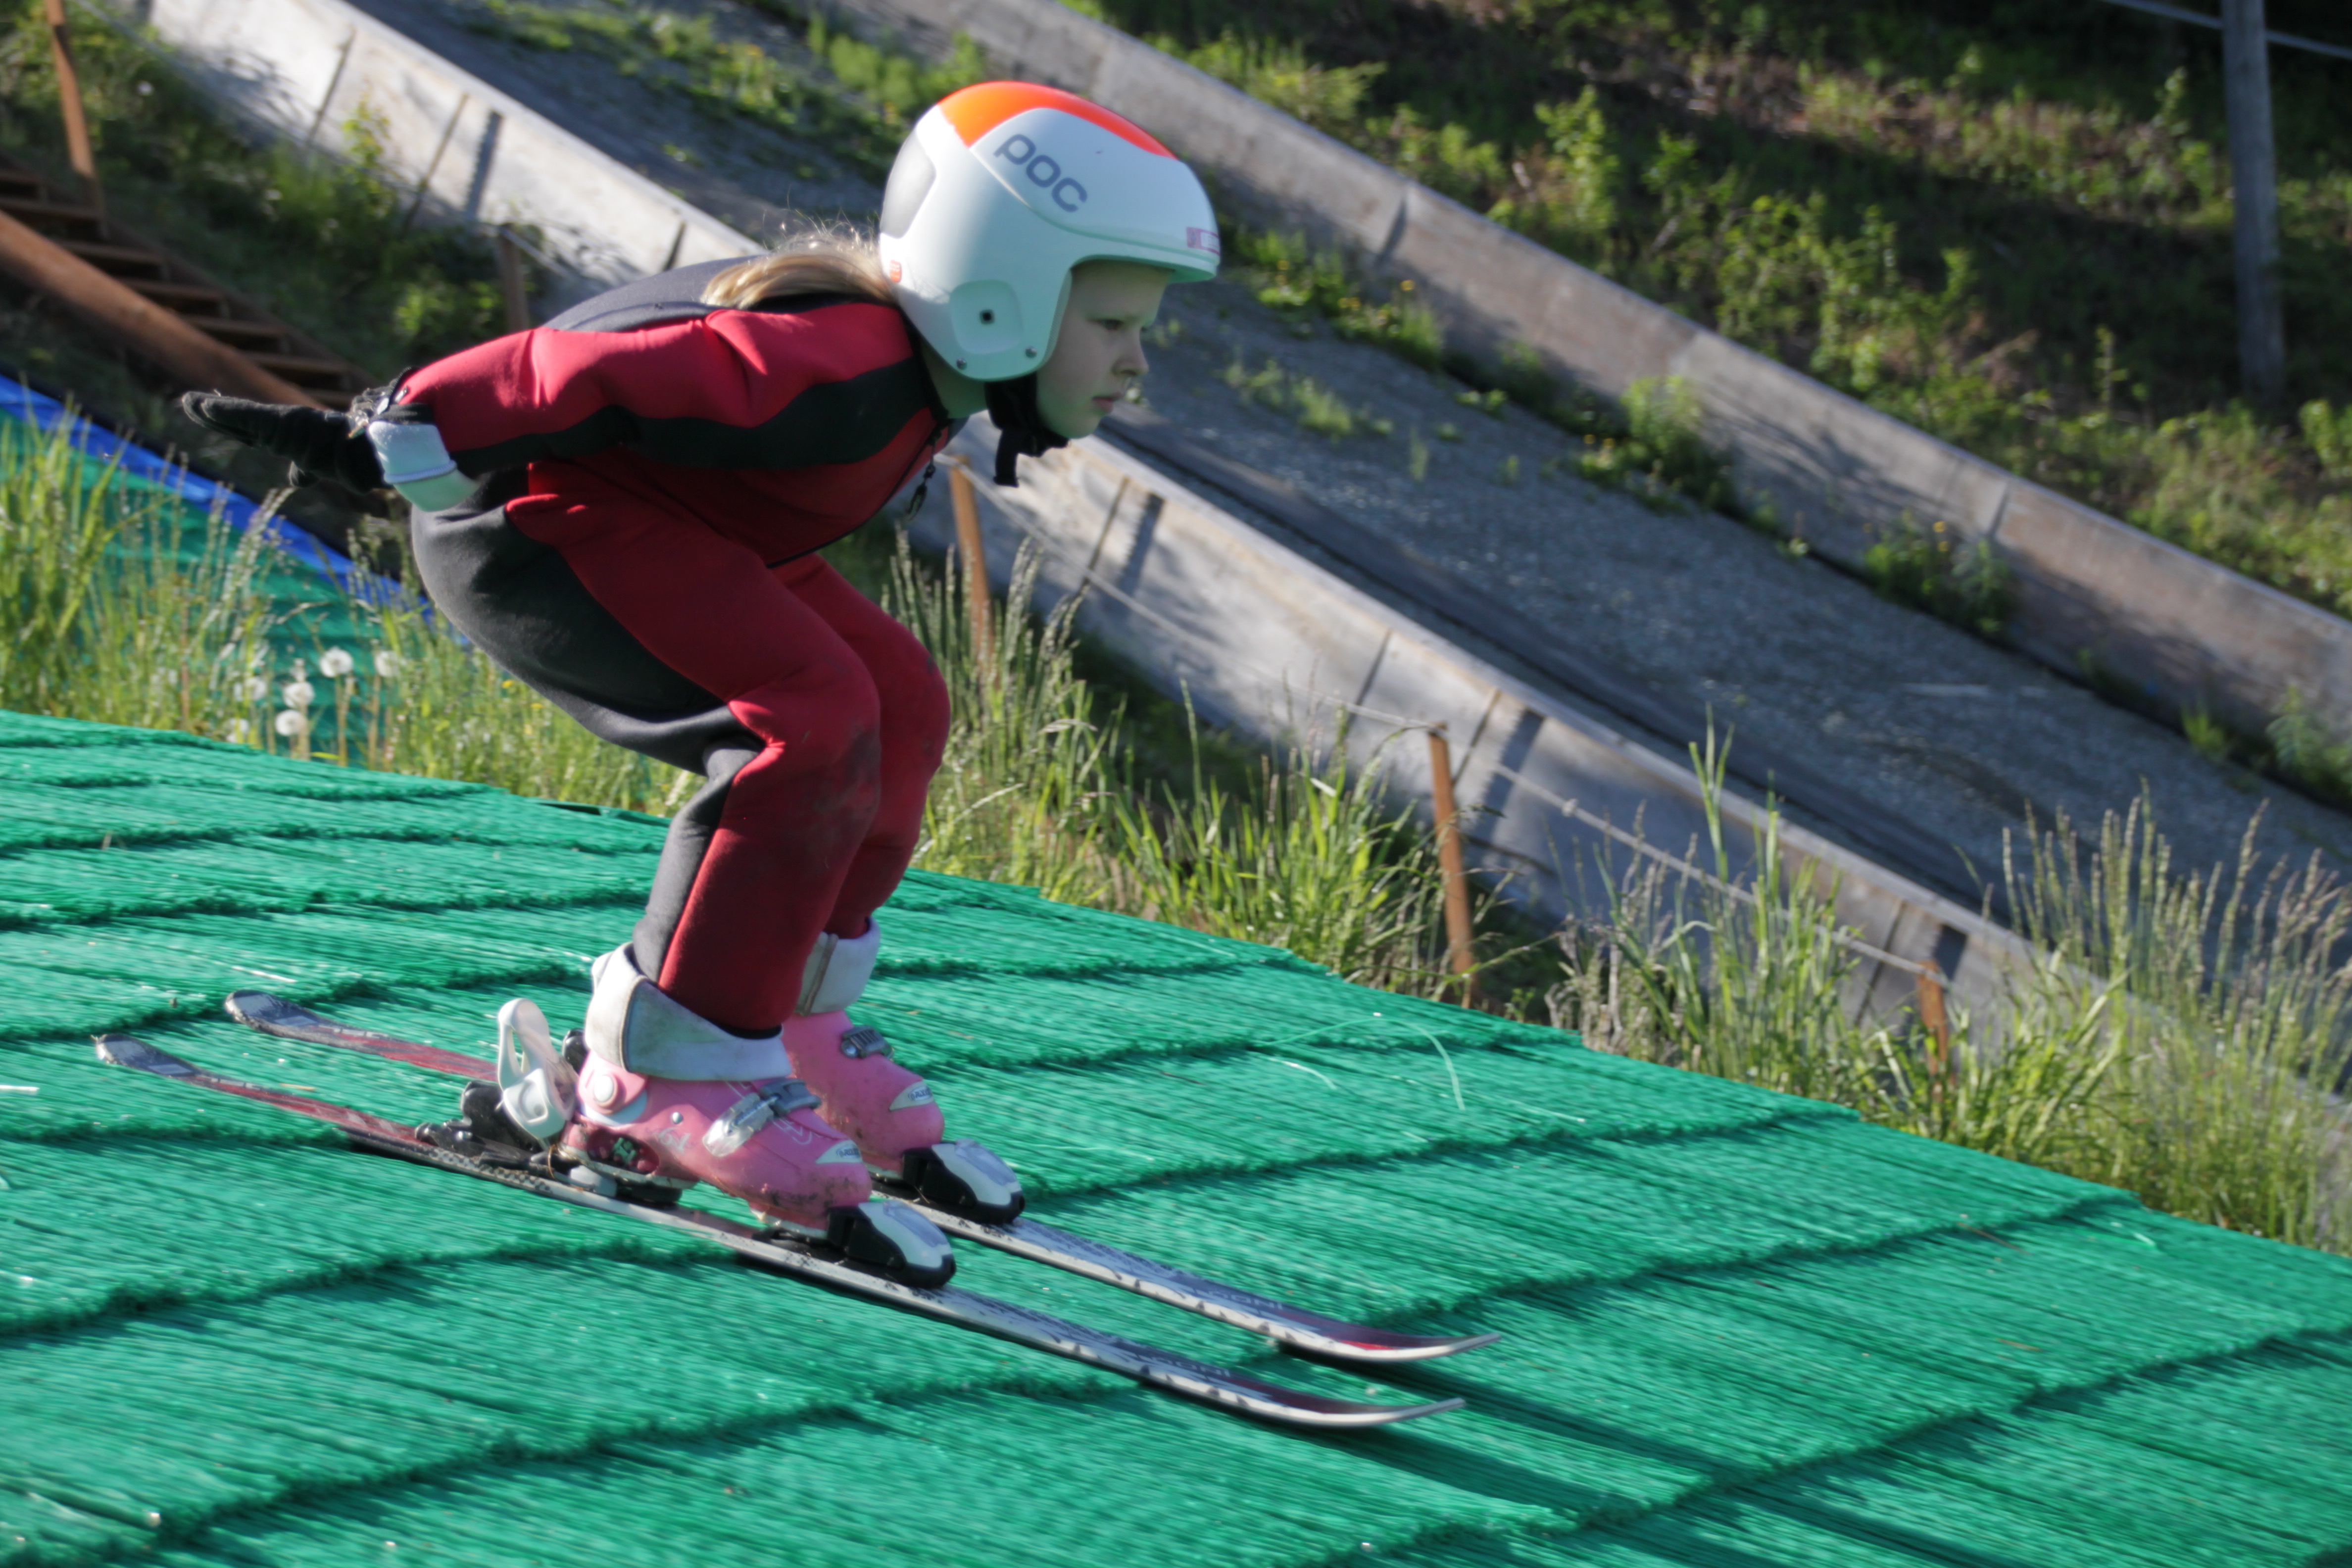 6-year-old Reilly Cooper skies down the 20 meter hill. (Photo by Ammon Swenson, Alaska Public Media - Anchorage)